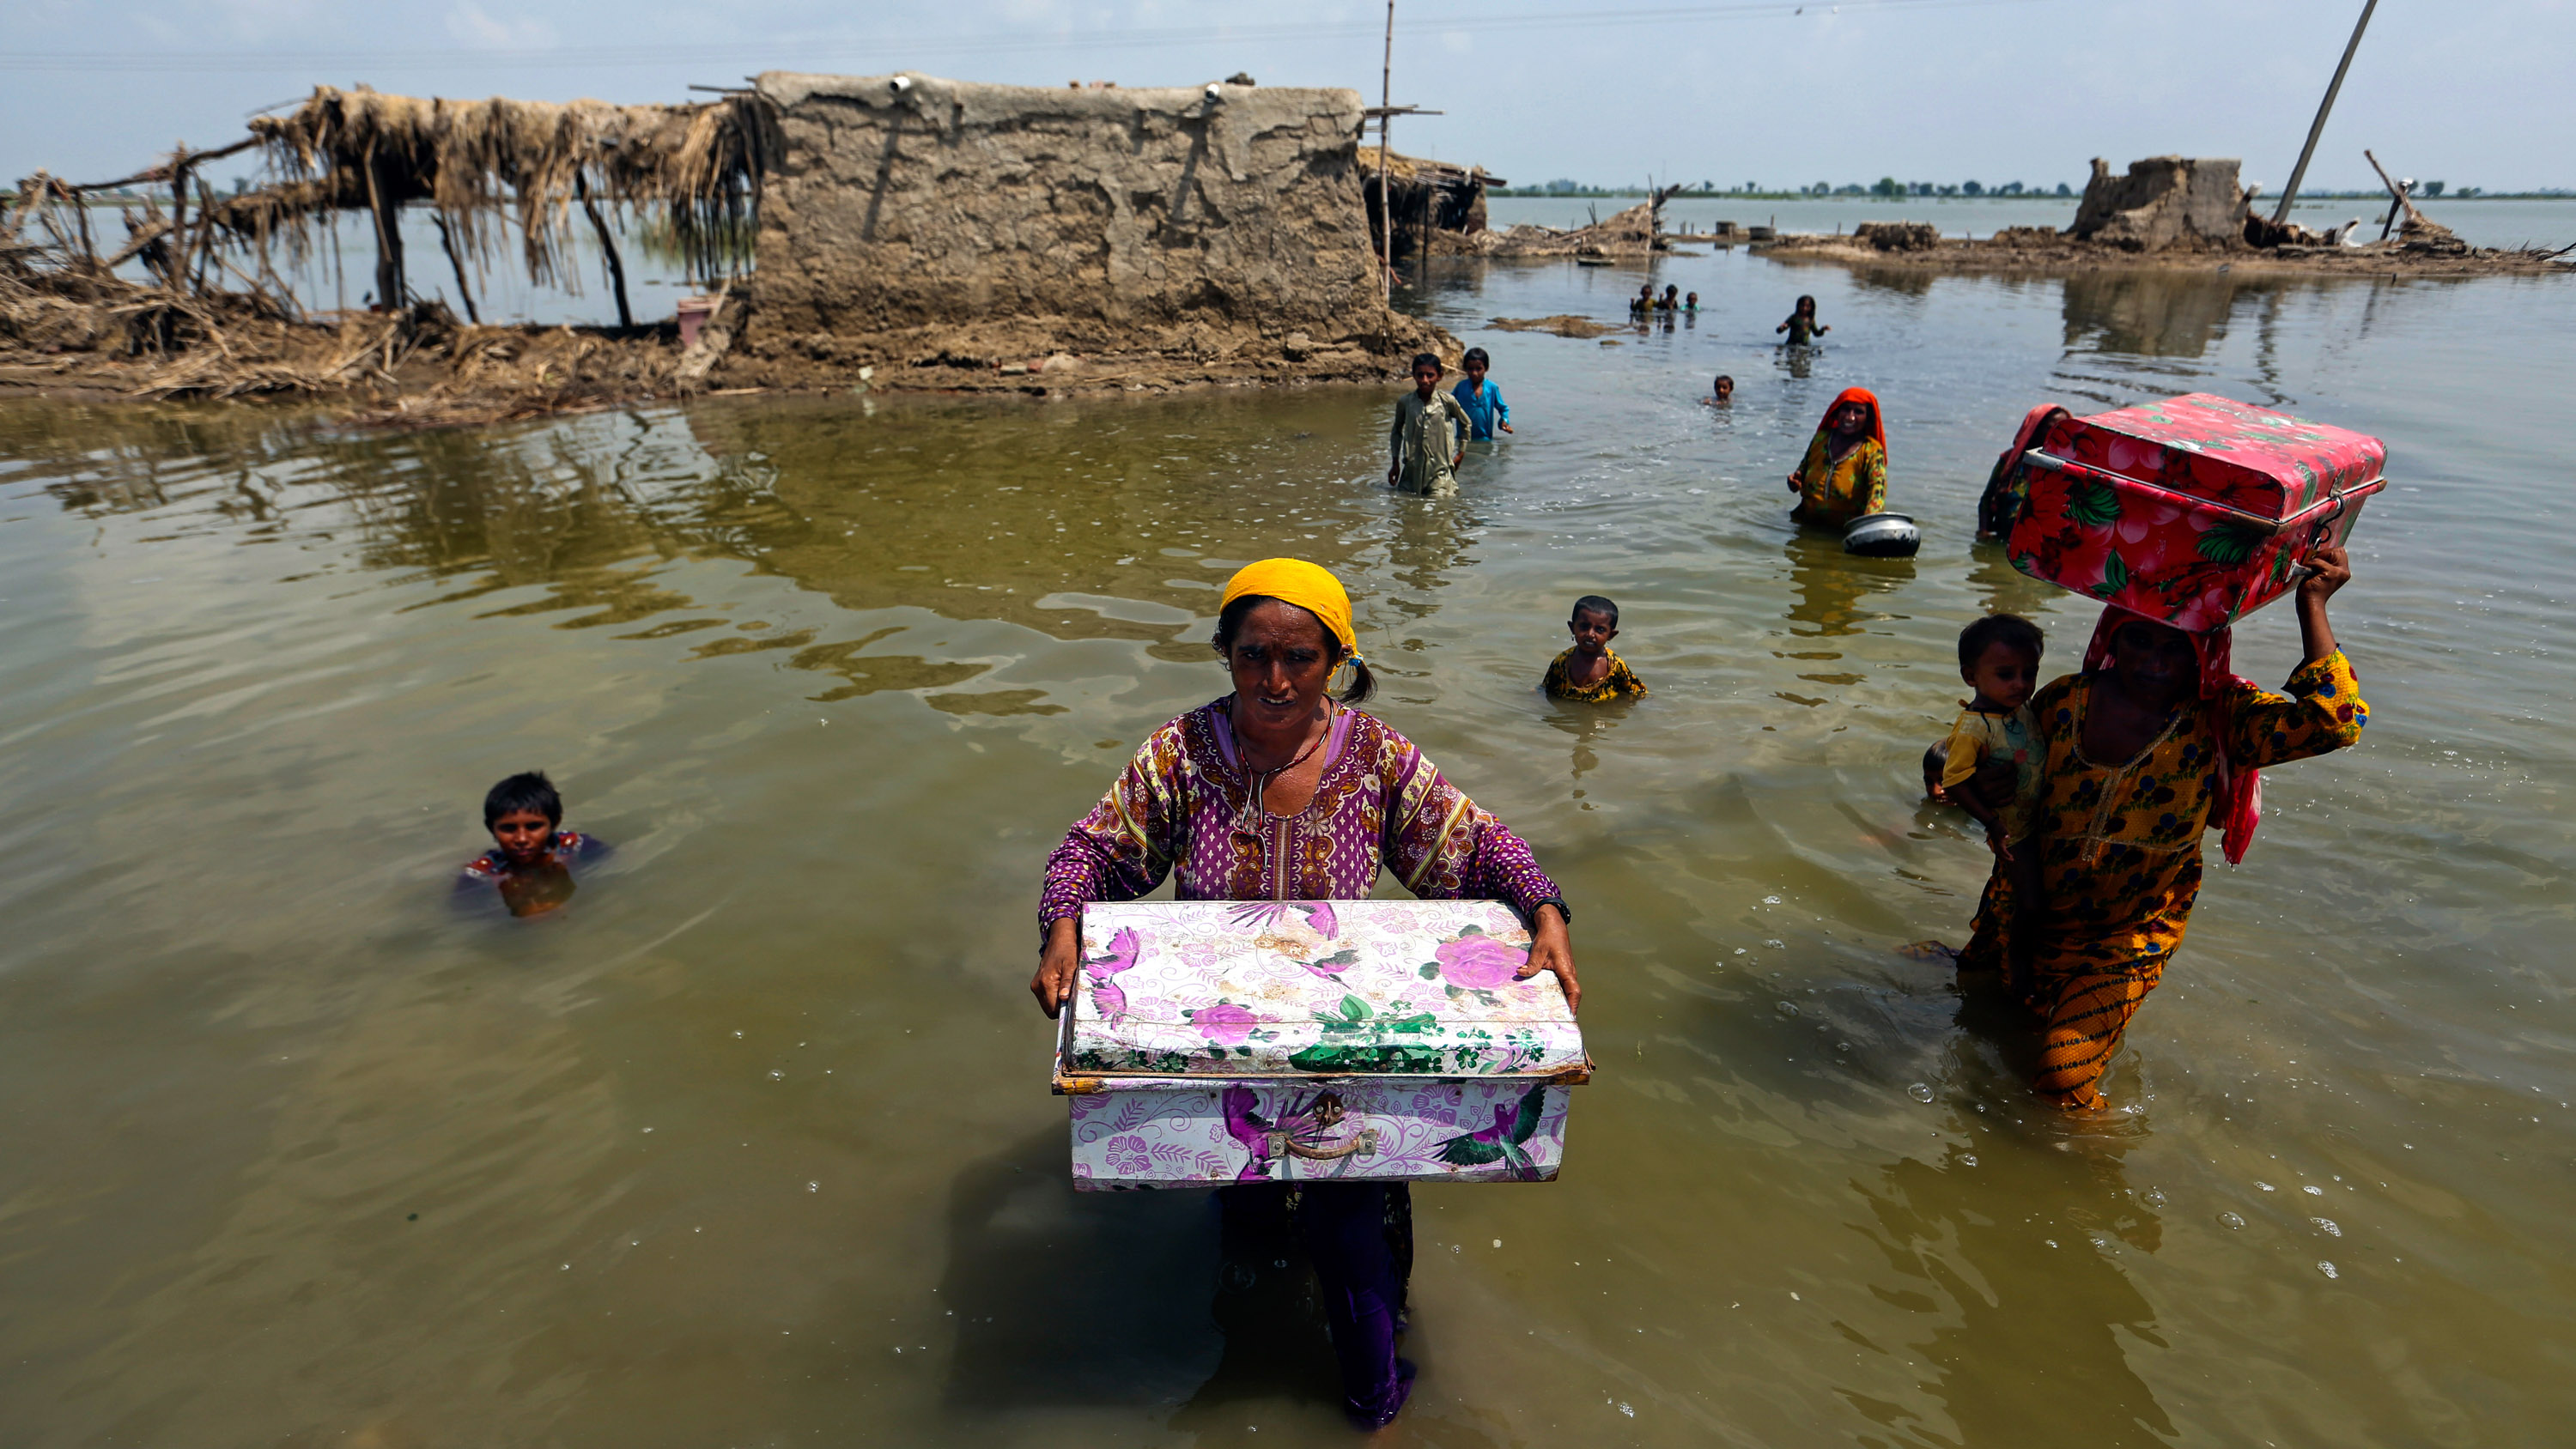 Pakistani women carry belongings salvaged from their flooded home after monsoon rains